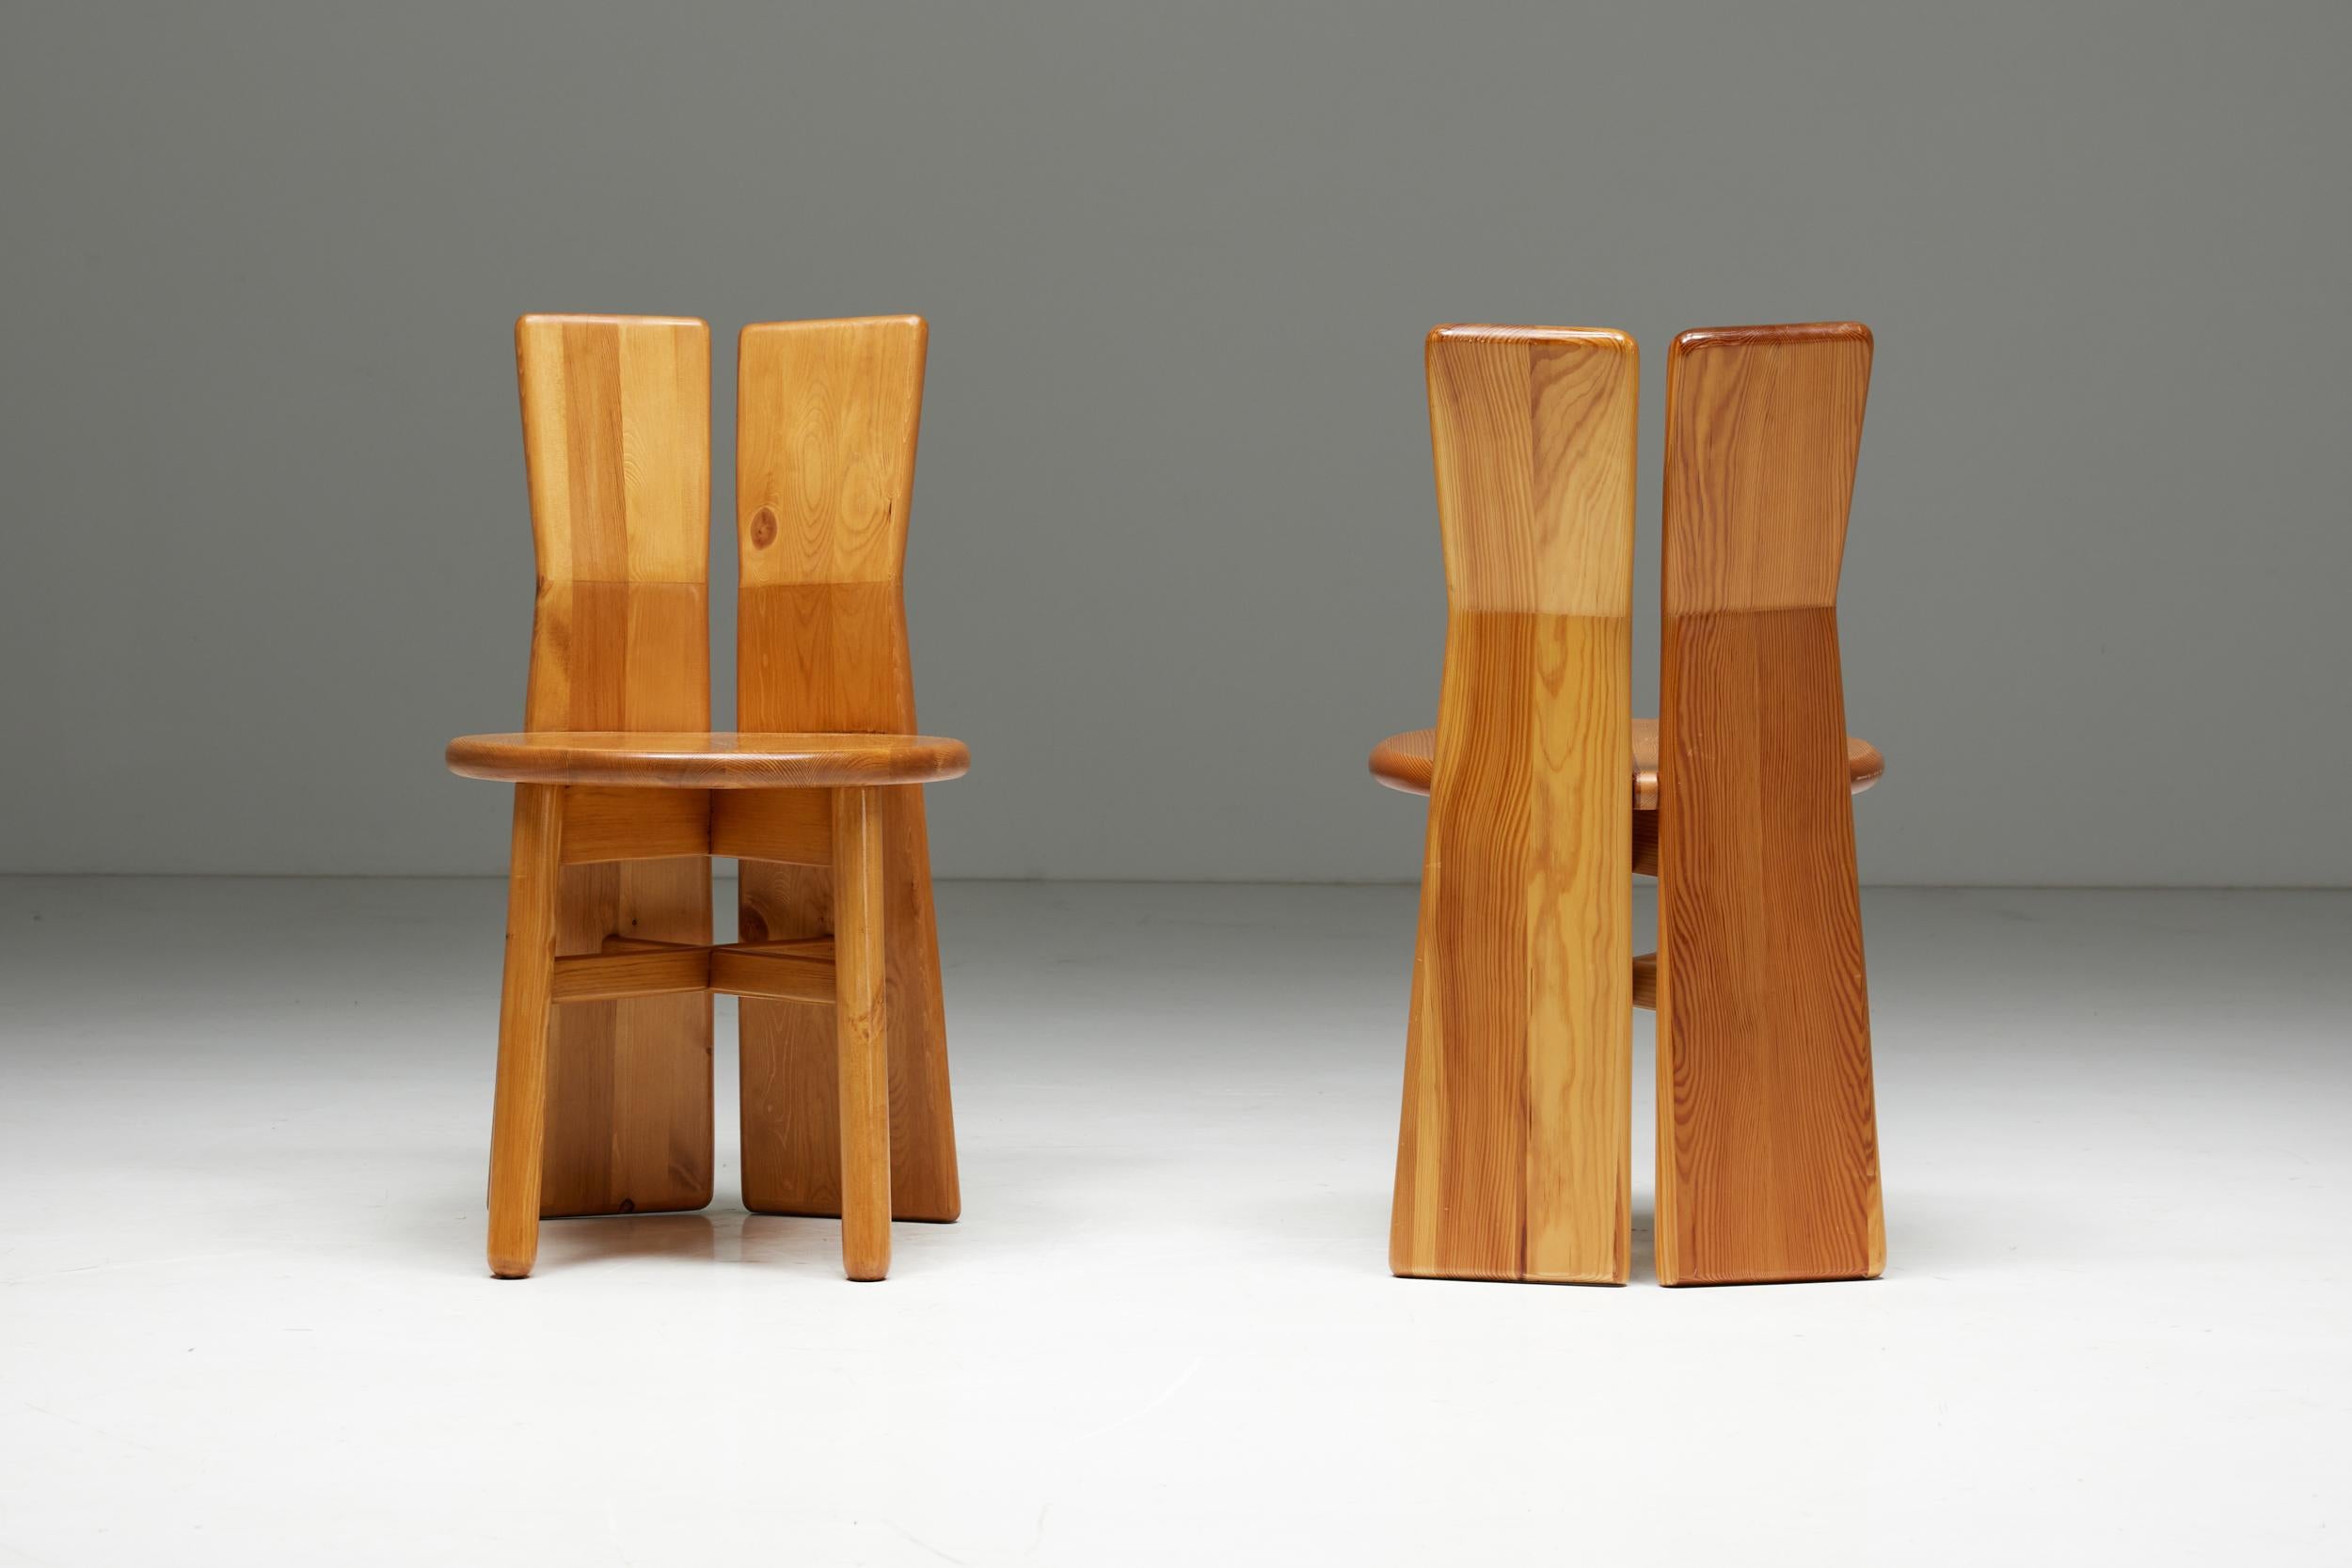 Italian Brutalist Pine Dining Chairs, Italy, 1970s For Sale 1